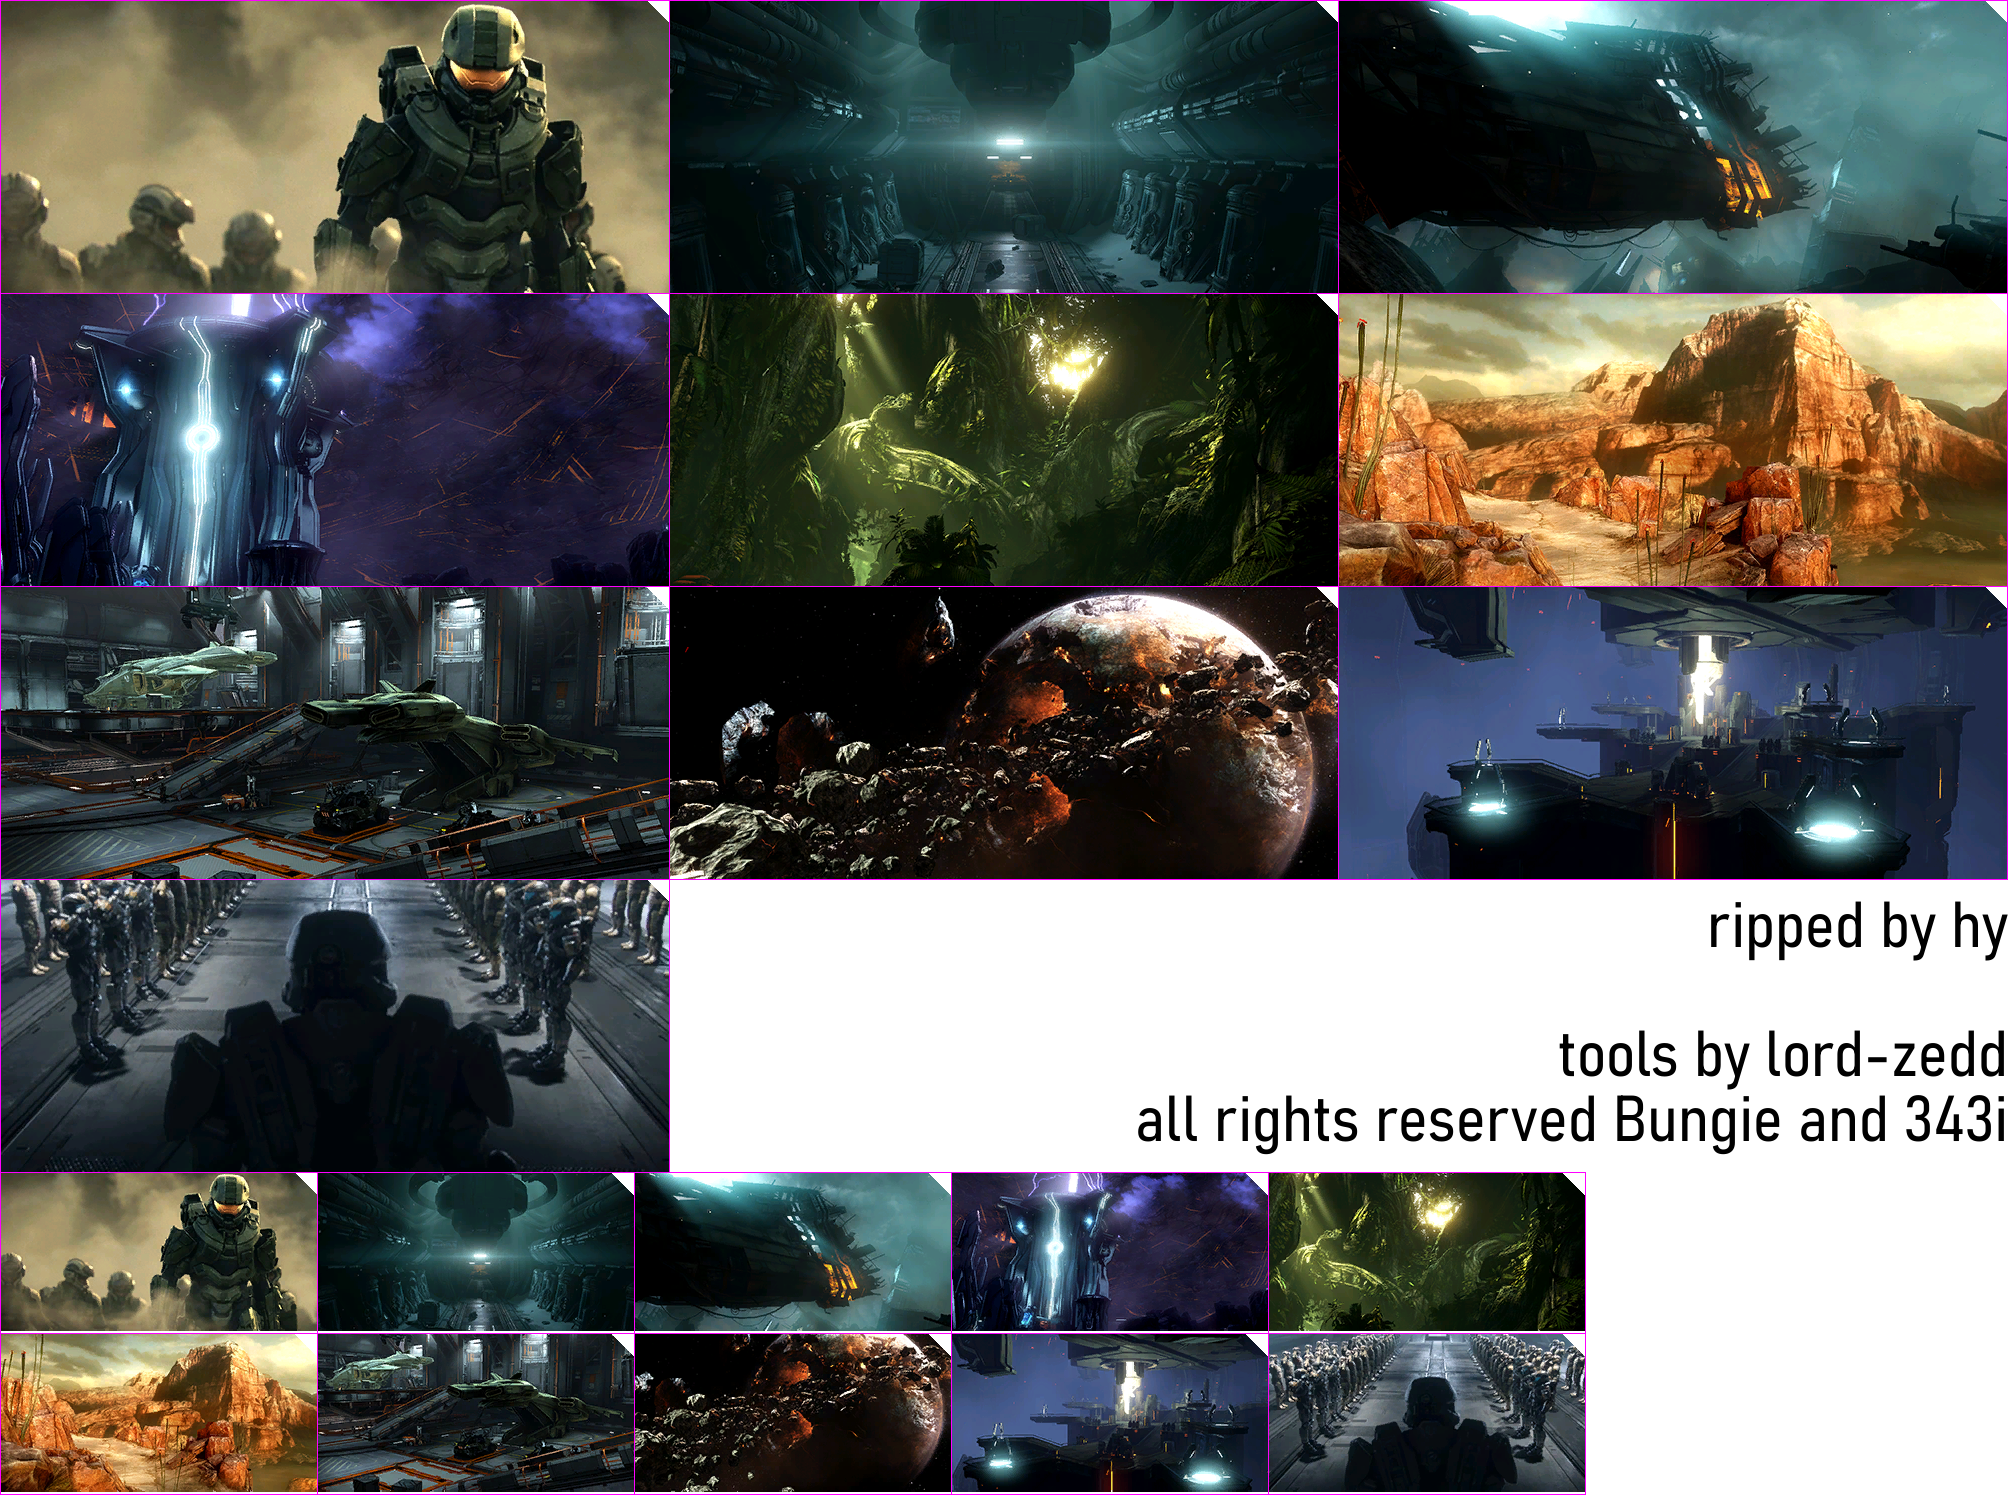 Halo: The Master Chief Collection - Halo 4 Campaign Level Previews